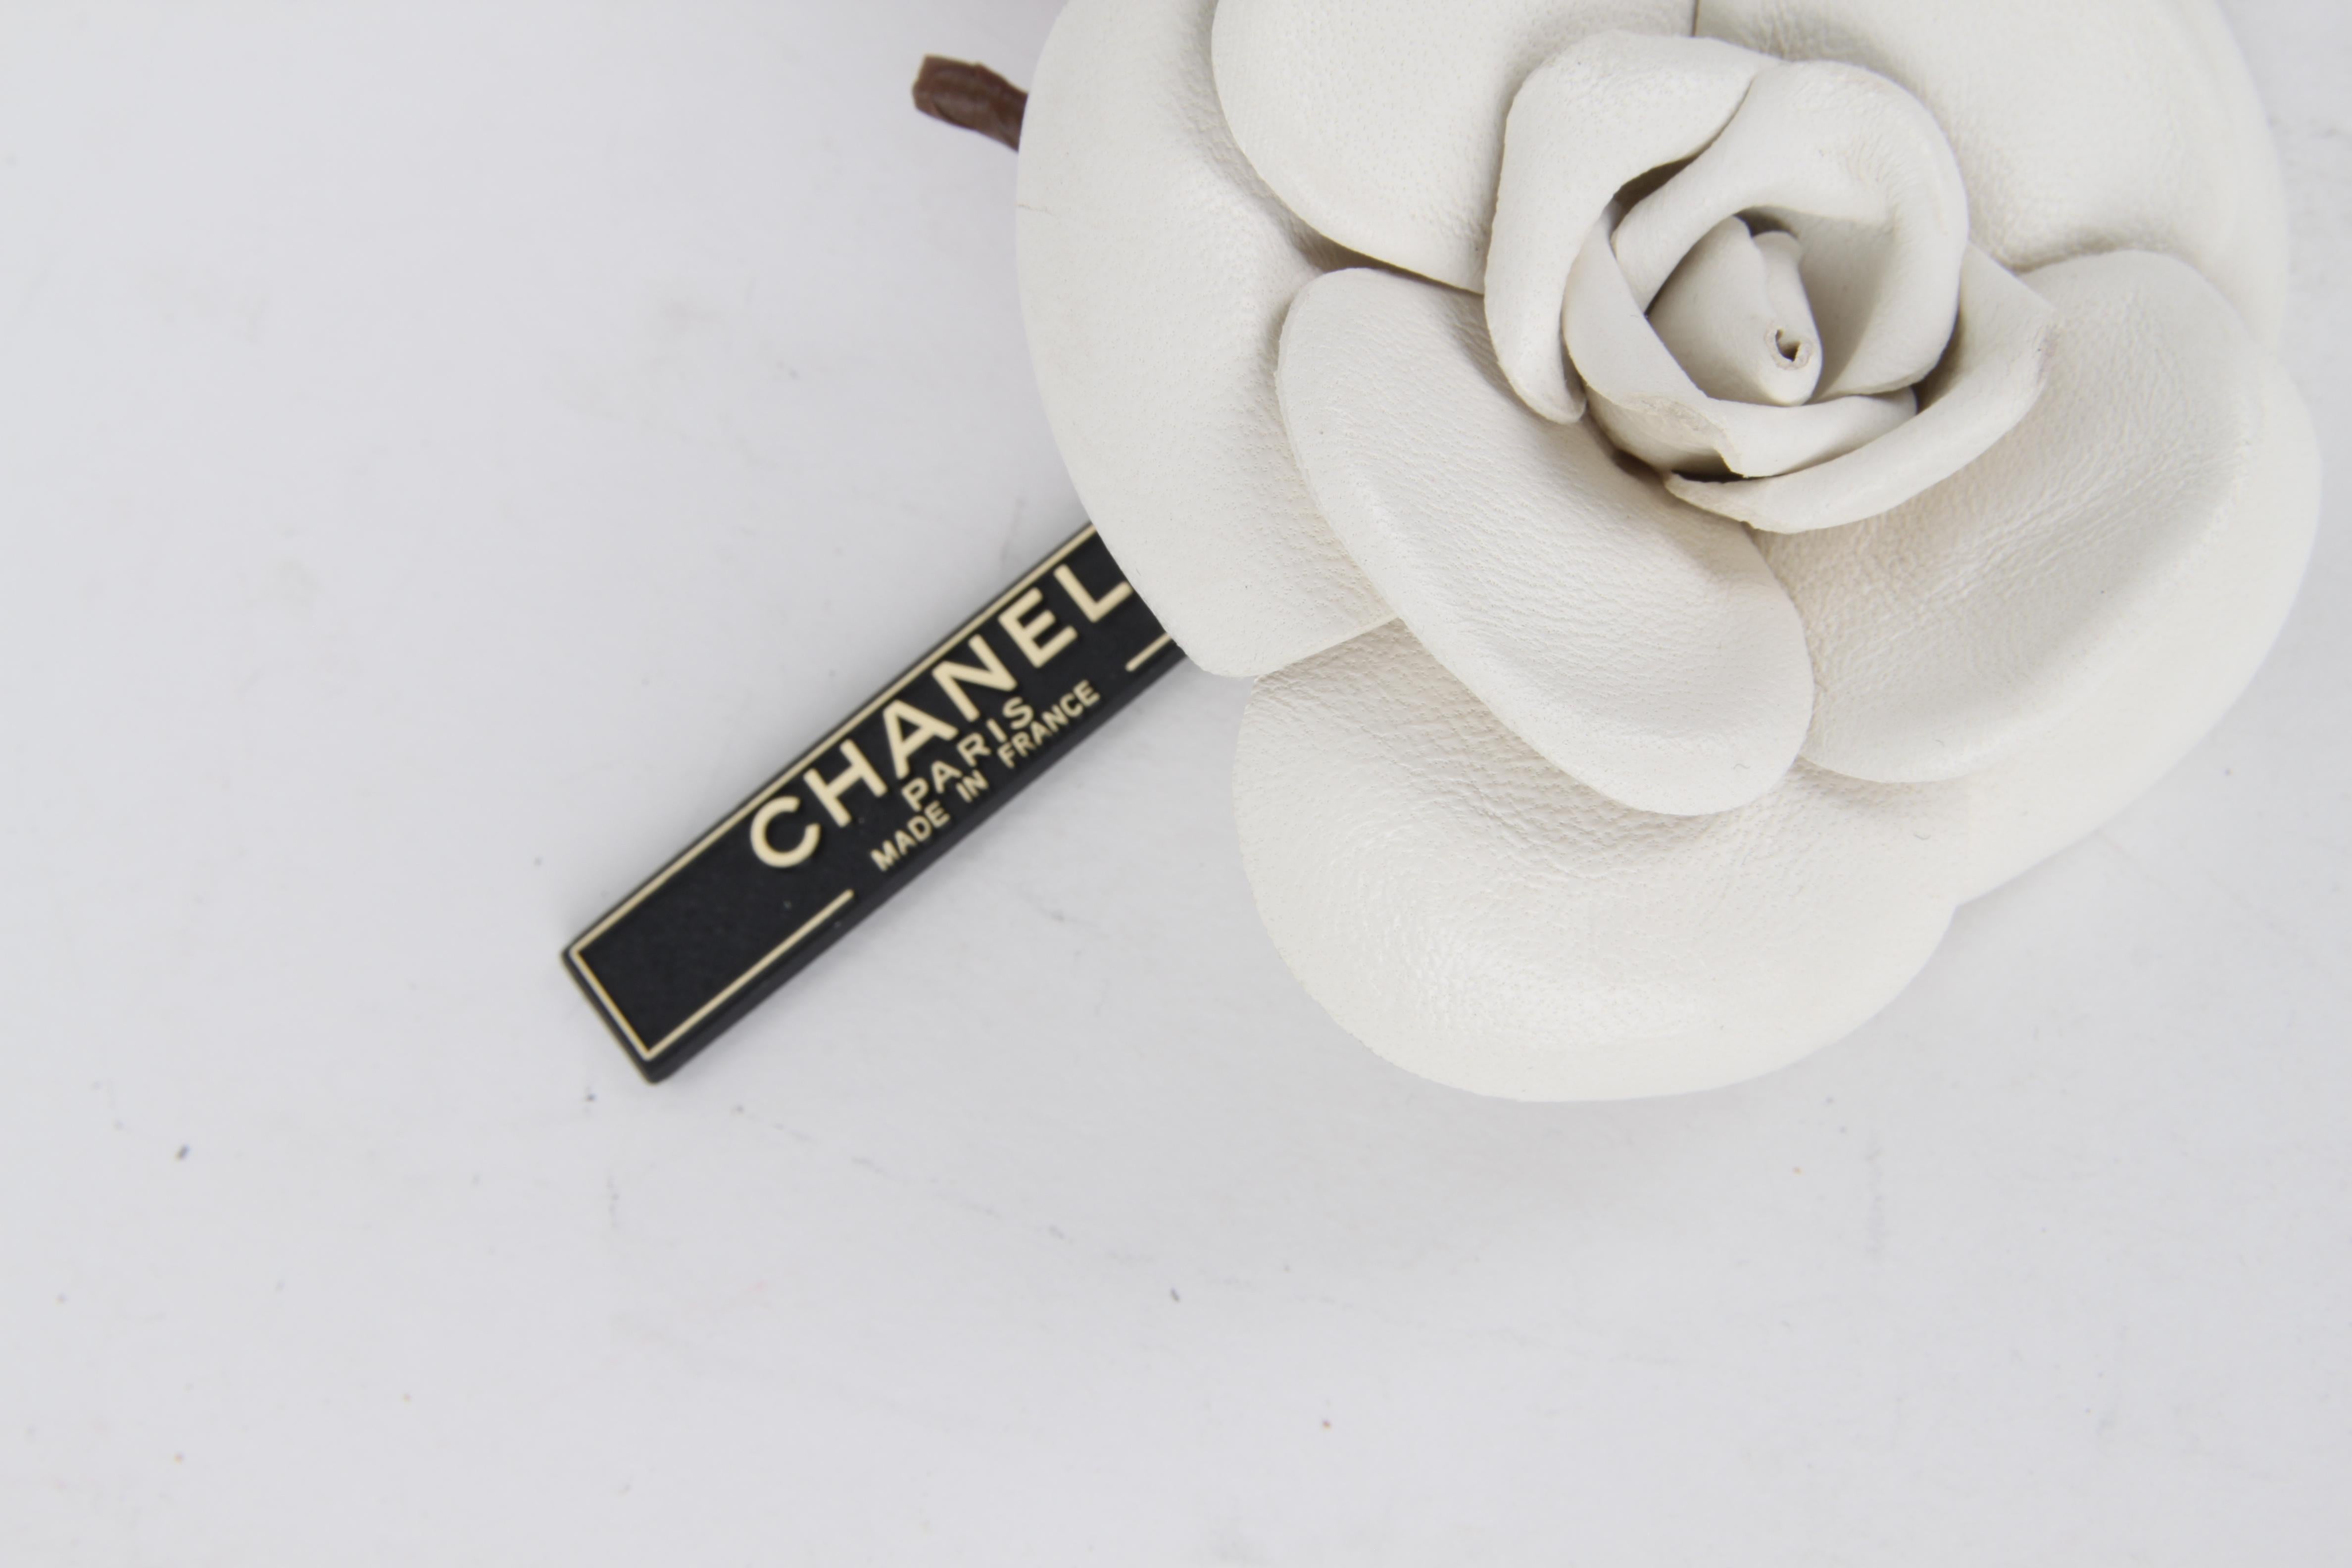 Chanel White Pink Leather Camellia Flower Brooch.

Crafted from silver leather, this regal brooch from Chanel features pink leather leave embellishments, the signature interlocking CC logo plate and a practical bar pin fastening.

Measurements: H: 8